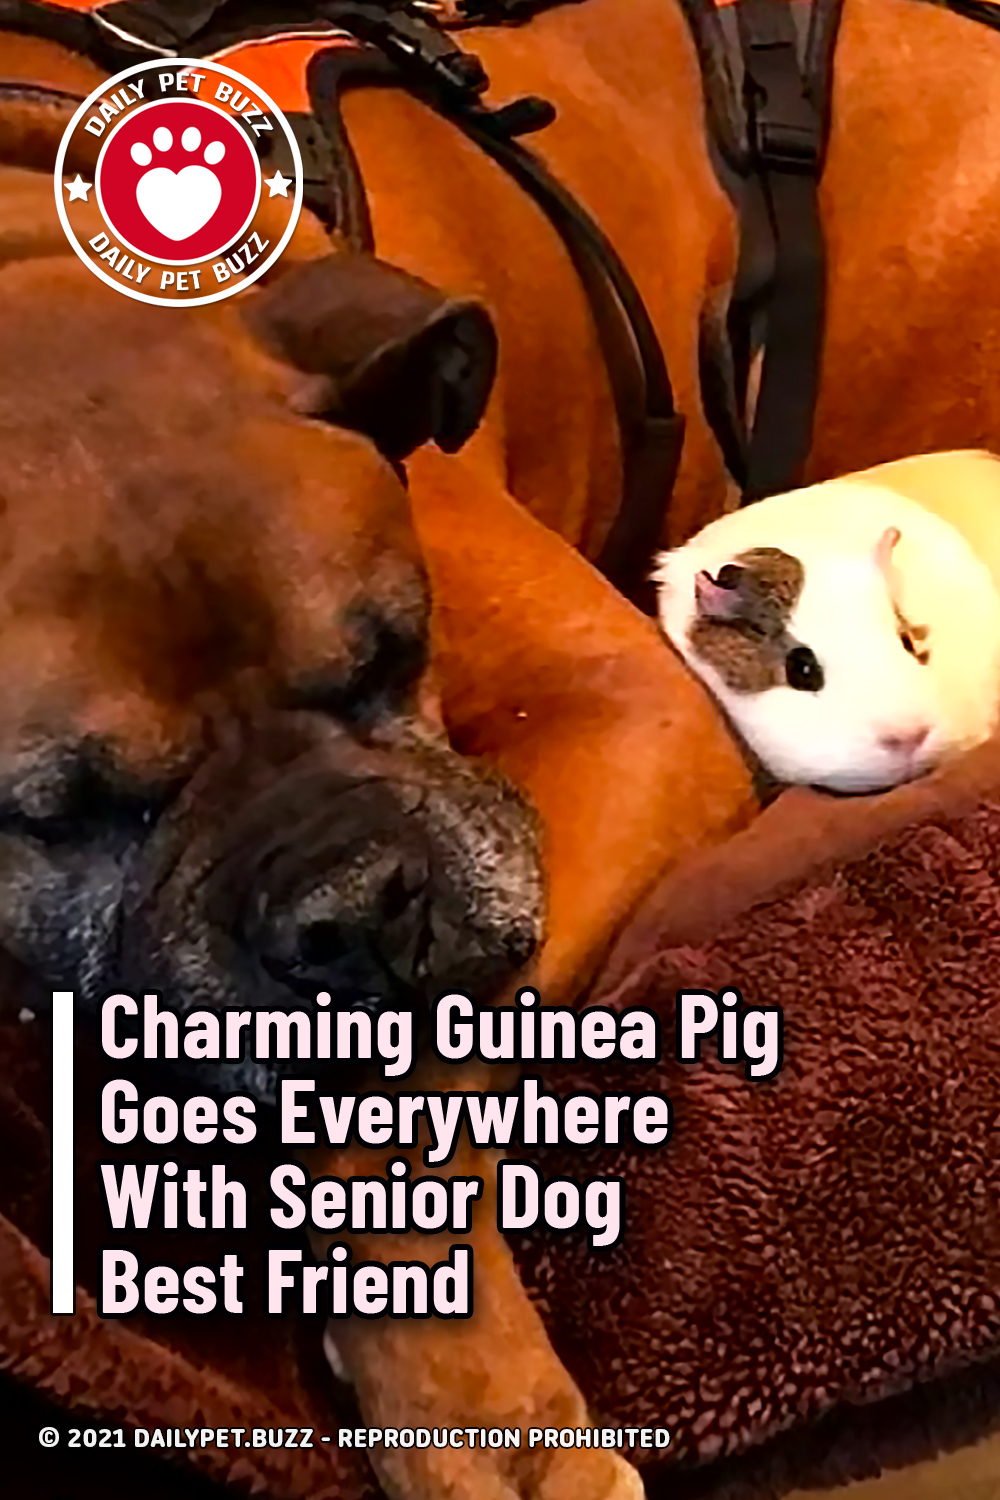 Charming Guinea Pig Goes Everywhere With Senior Dog Best Friend